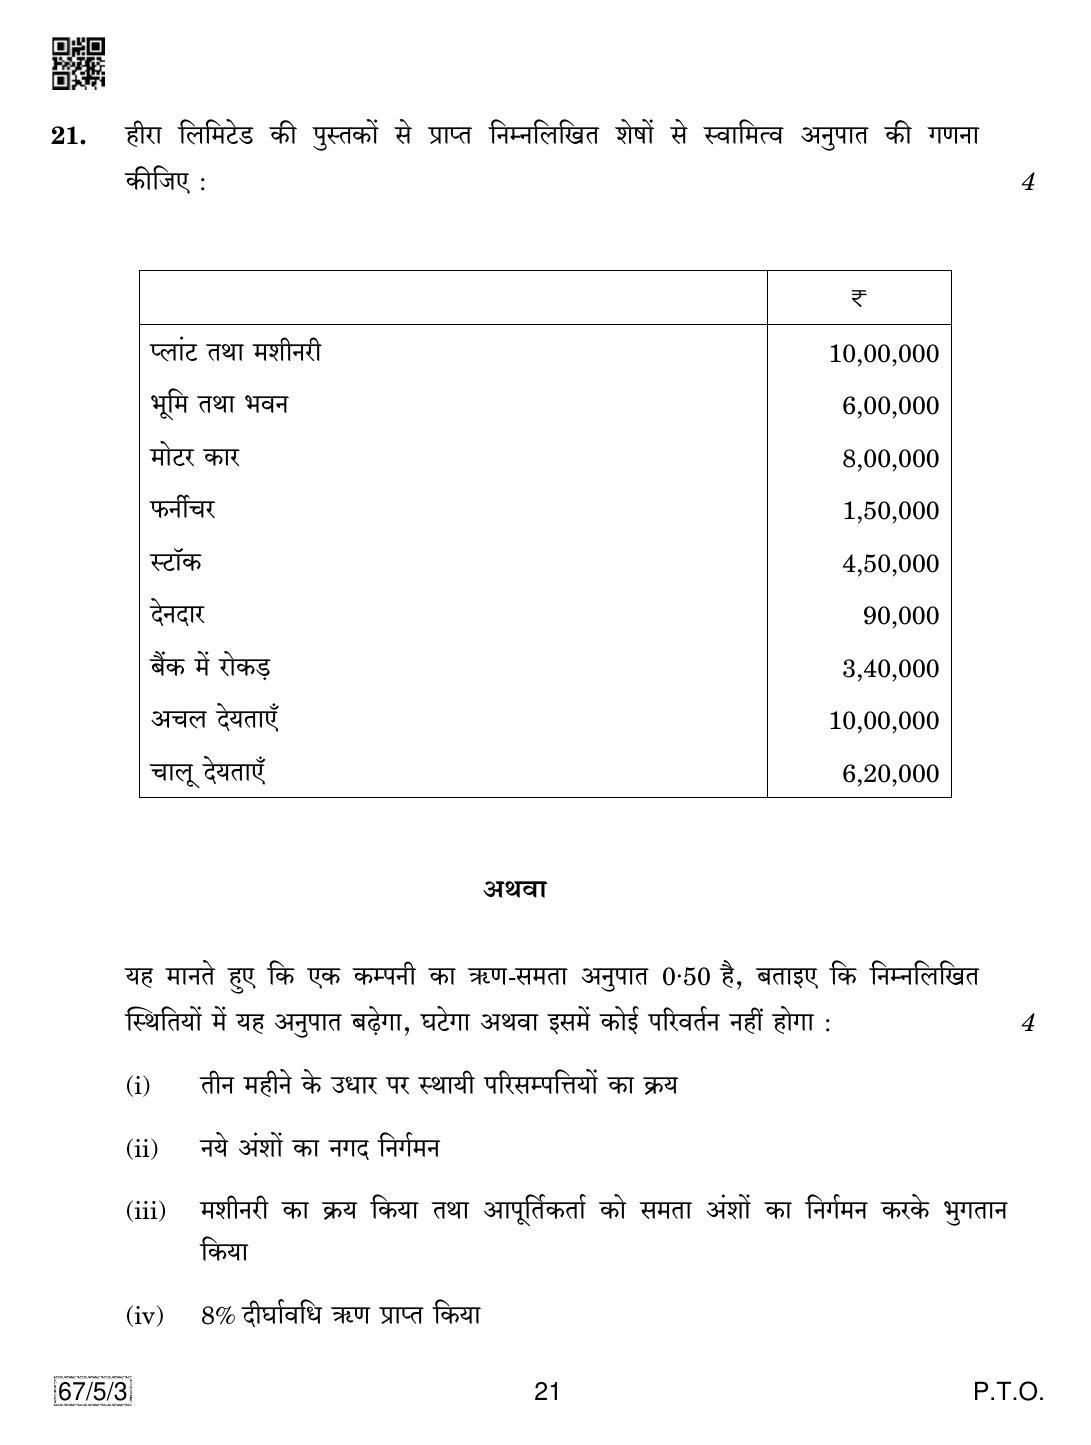 CBSE Class 12 67-5-3 Accountancy 2019 Question Paper - Page 21